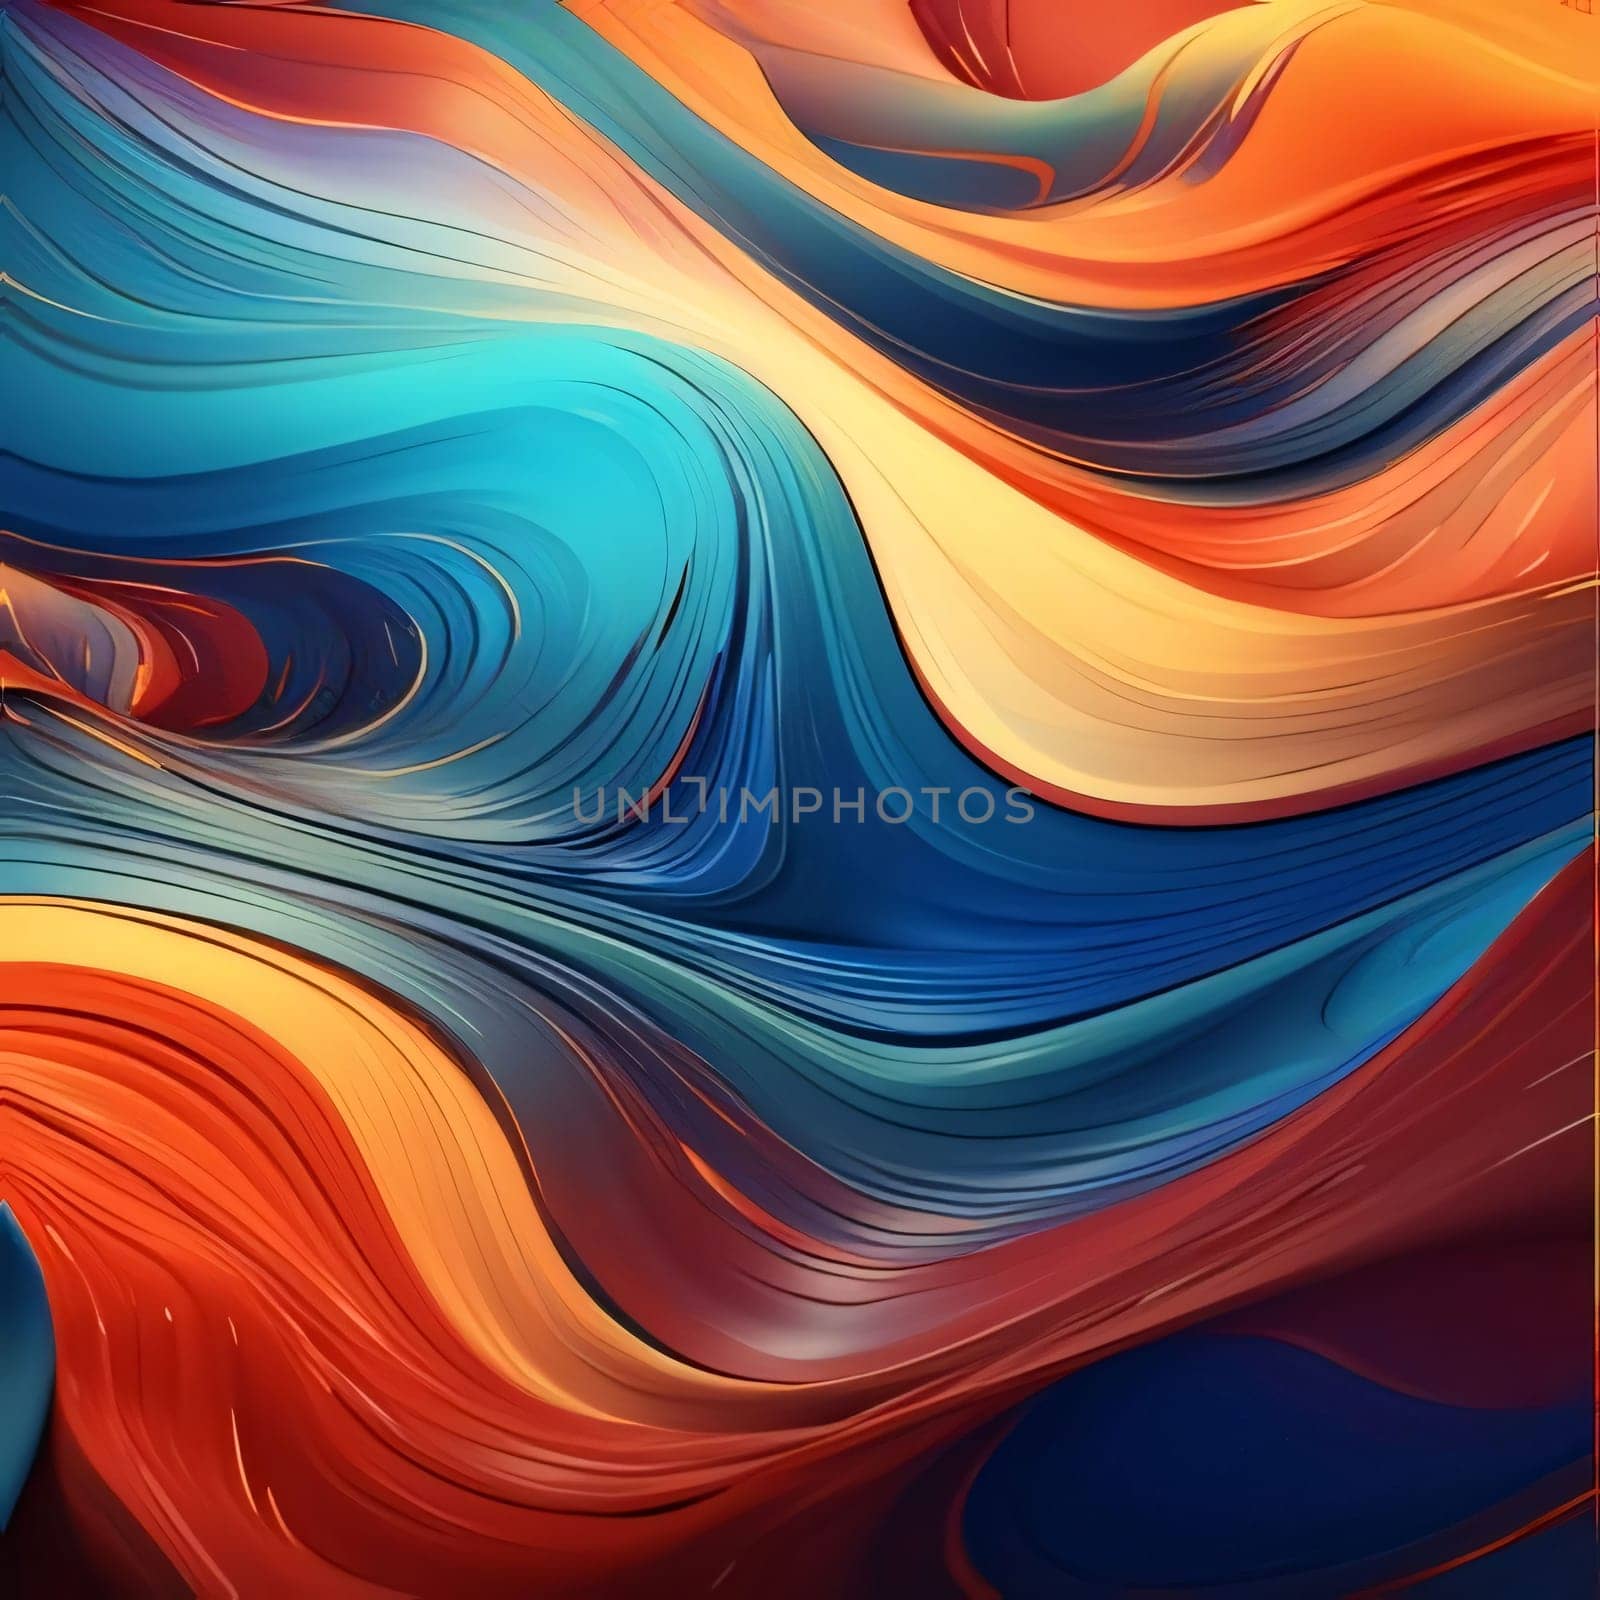 Abstract background design: Abstract background with blue and orange wavy lines. Vector illustration.